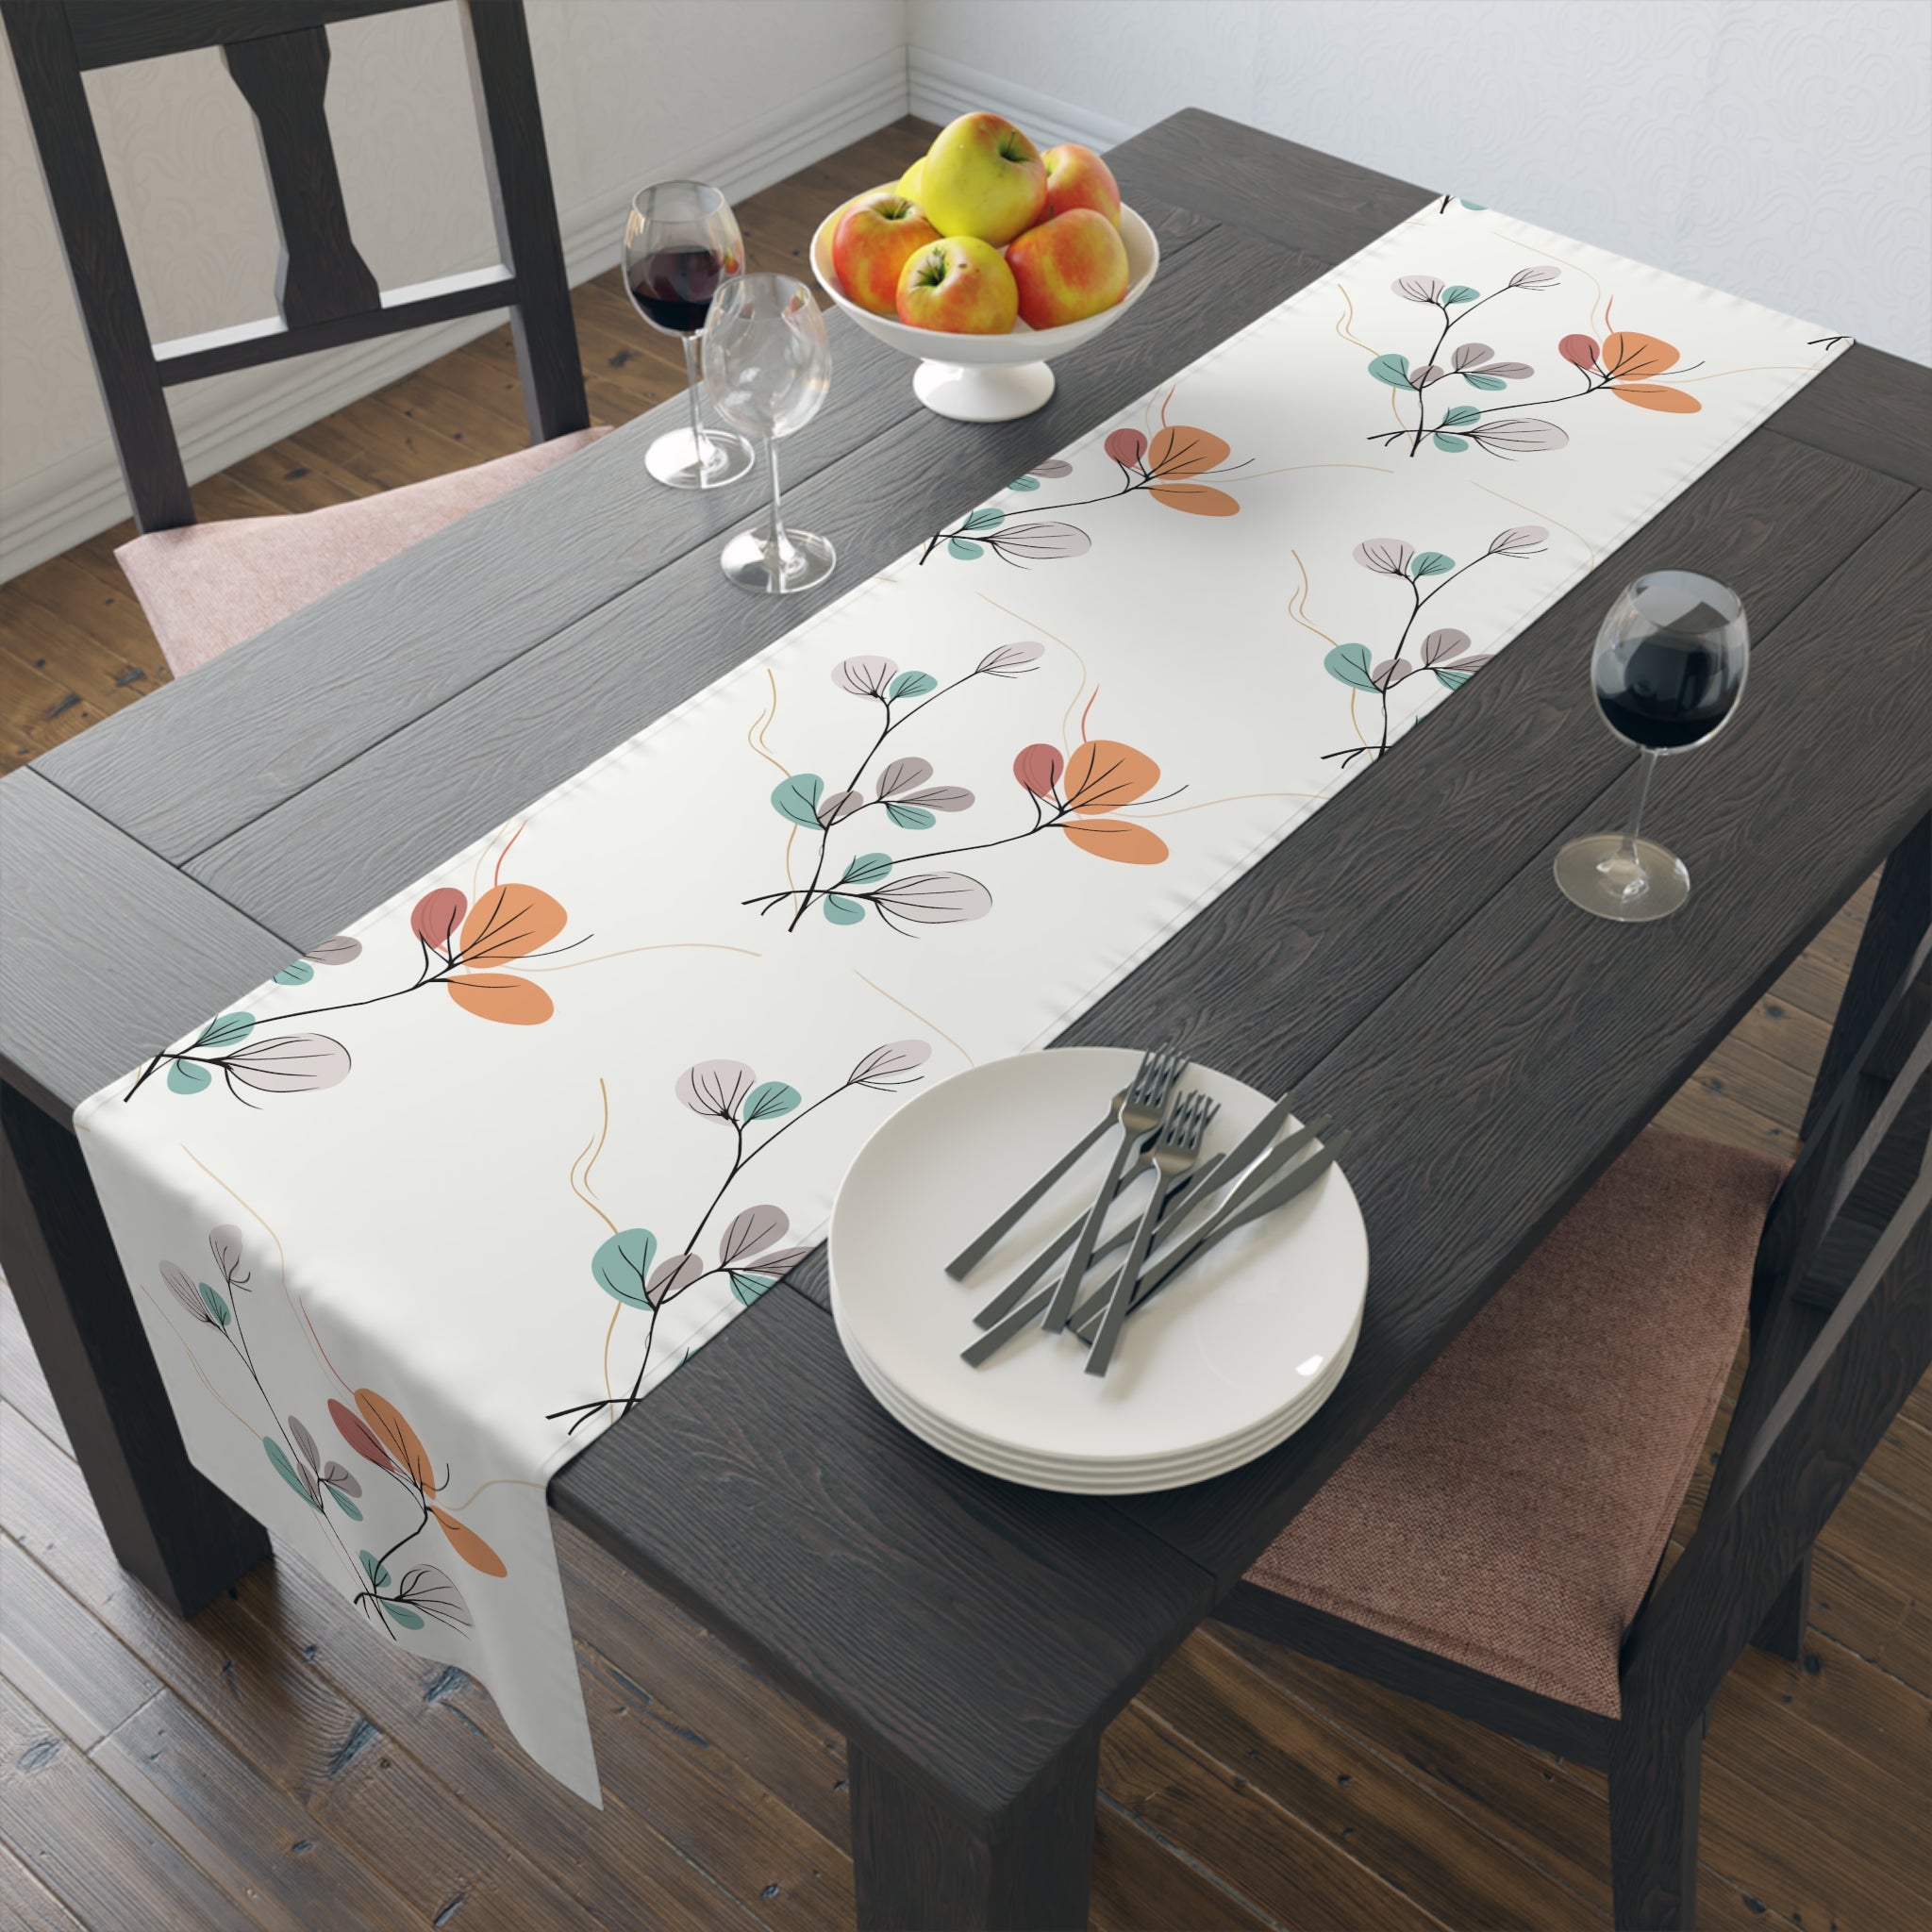 Floral Reverie: The Minimalist Flower Table Runner - My Store